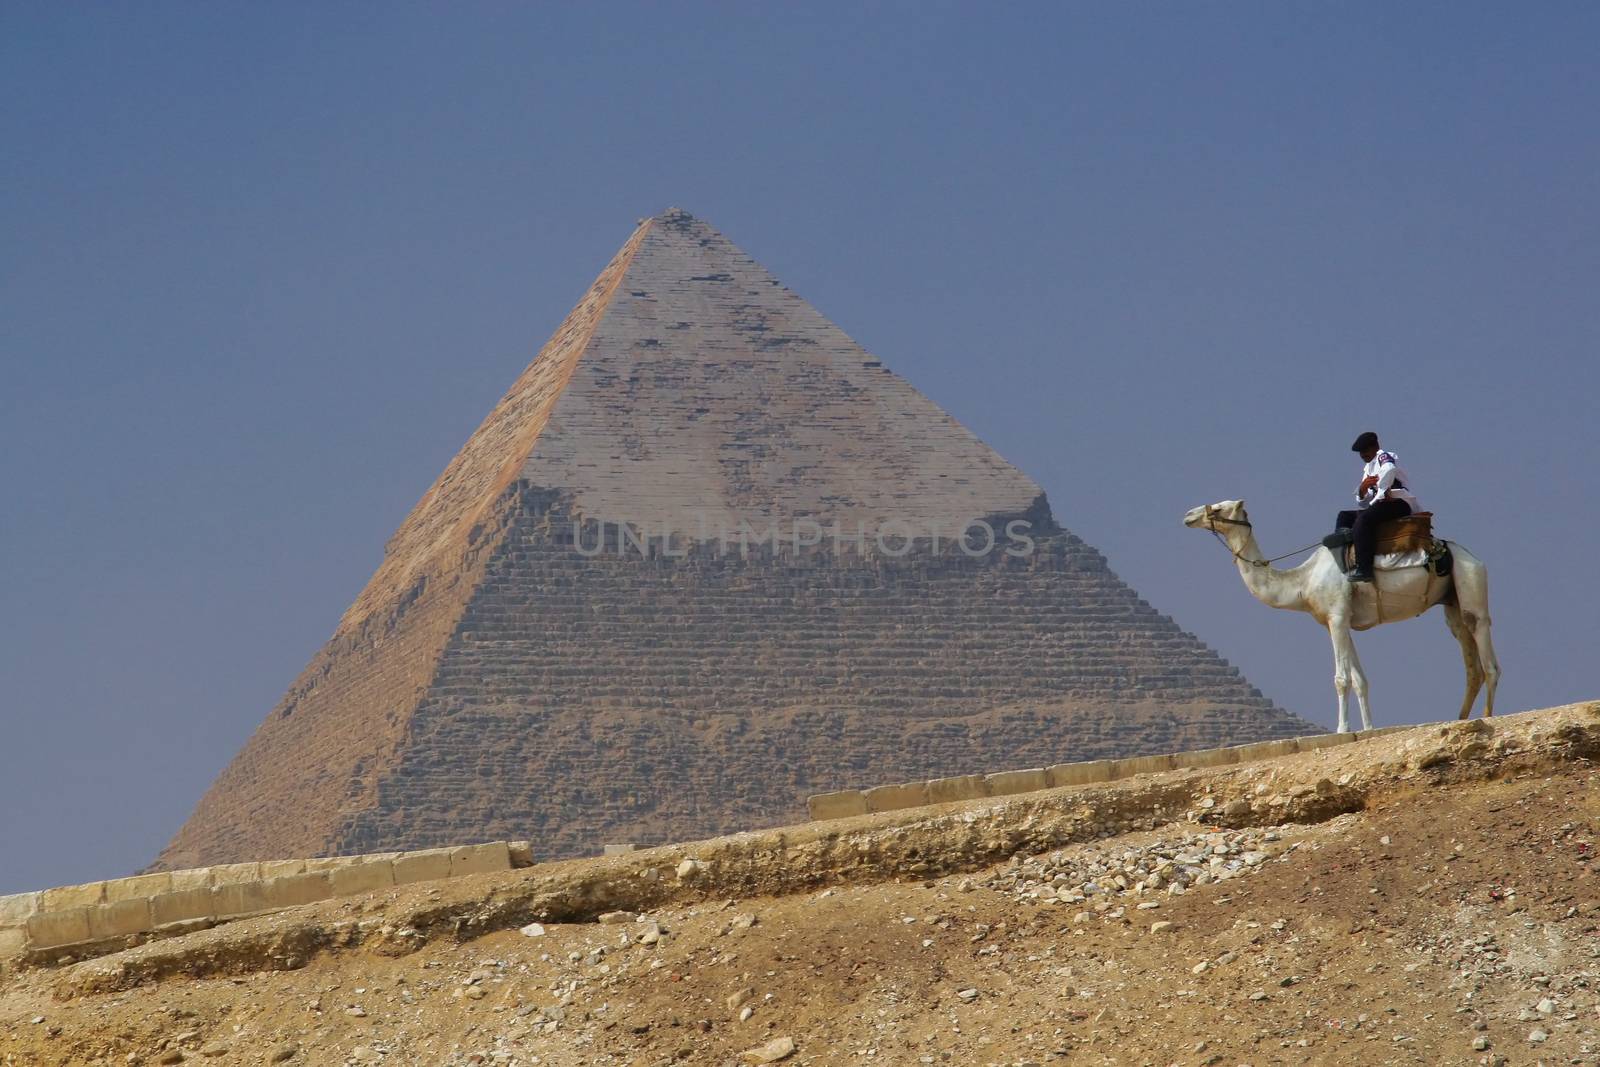 Pyramid of Khafre (Chephren) in Giza - Cairo, Egypt with a tourist police on a camel